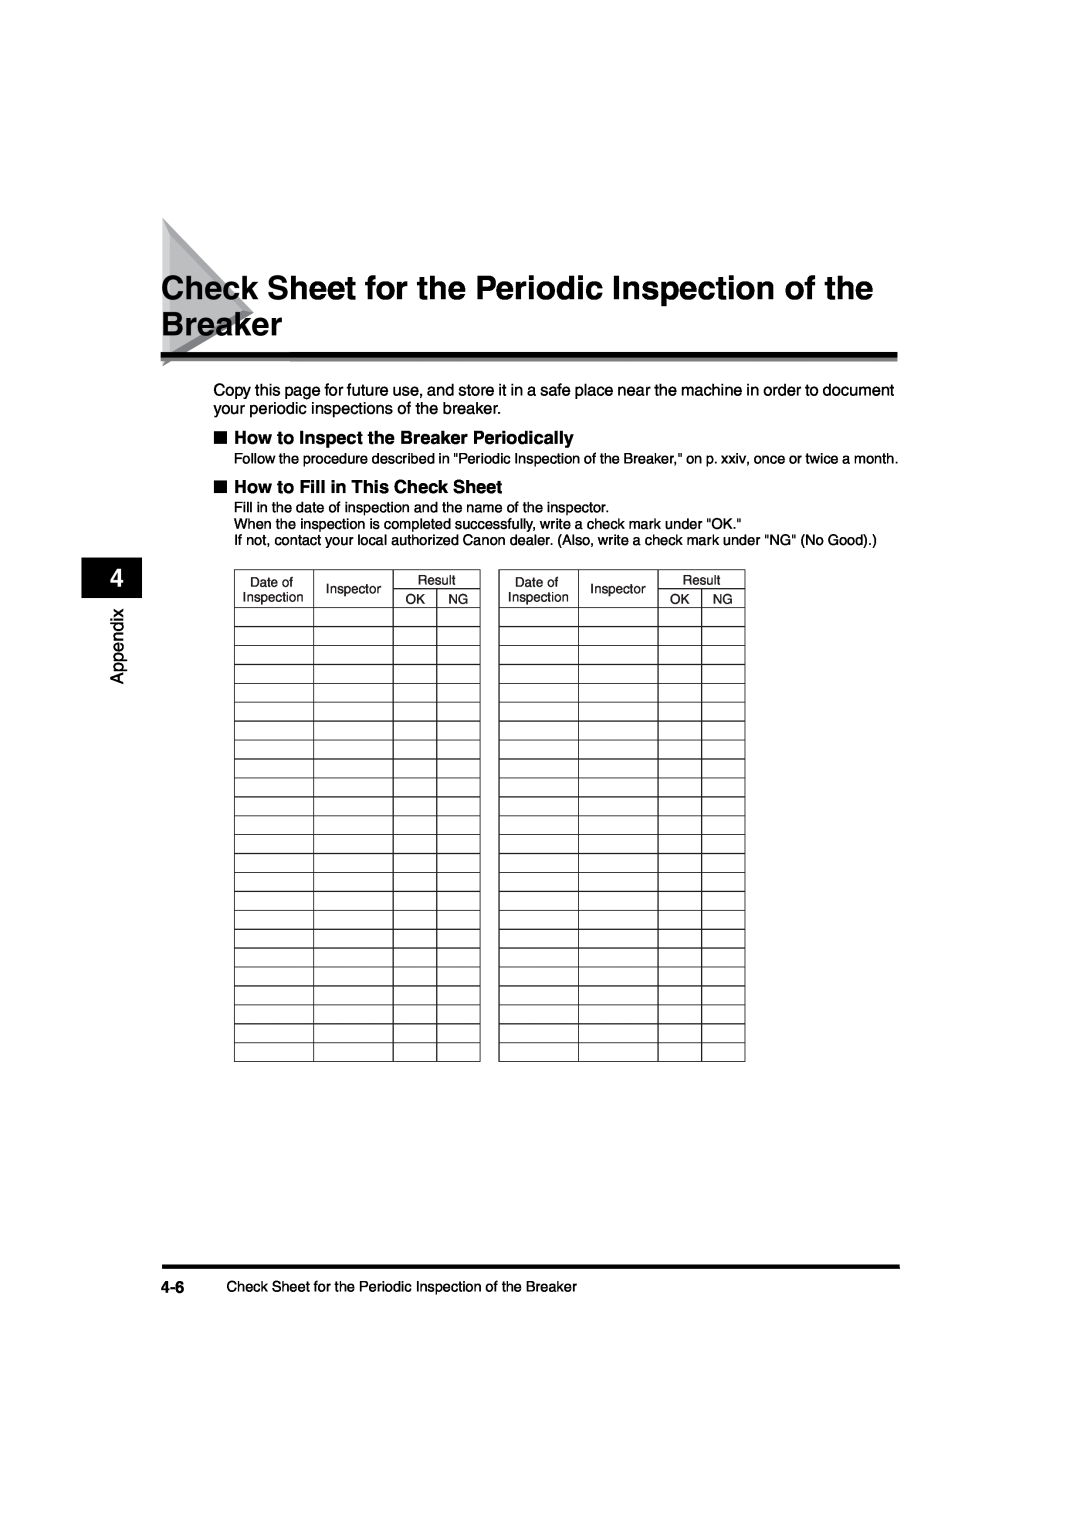 Canon iR6570 manual Check Sheet for the Periodic Inspection of the Breaker, How to Inspect the Breaker Periodically 